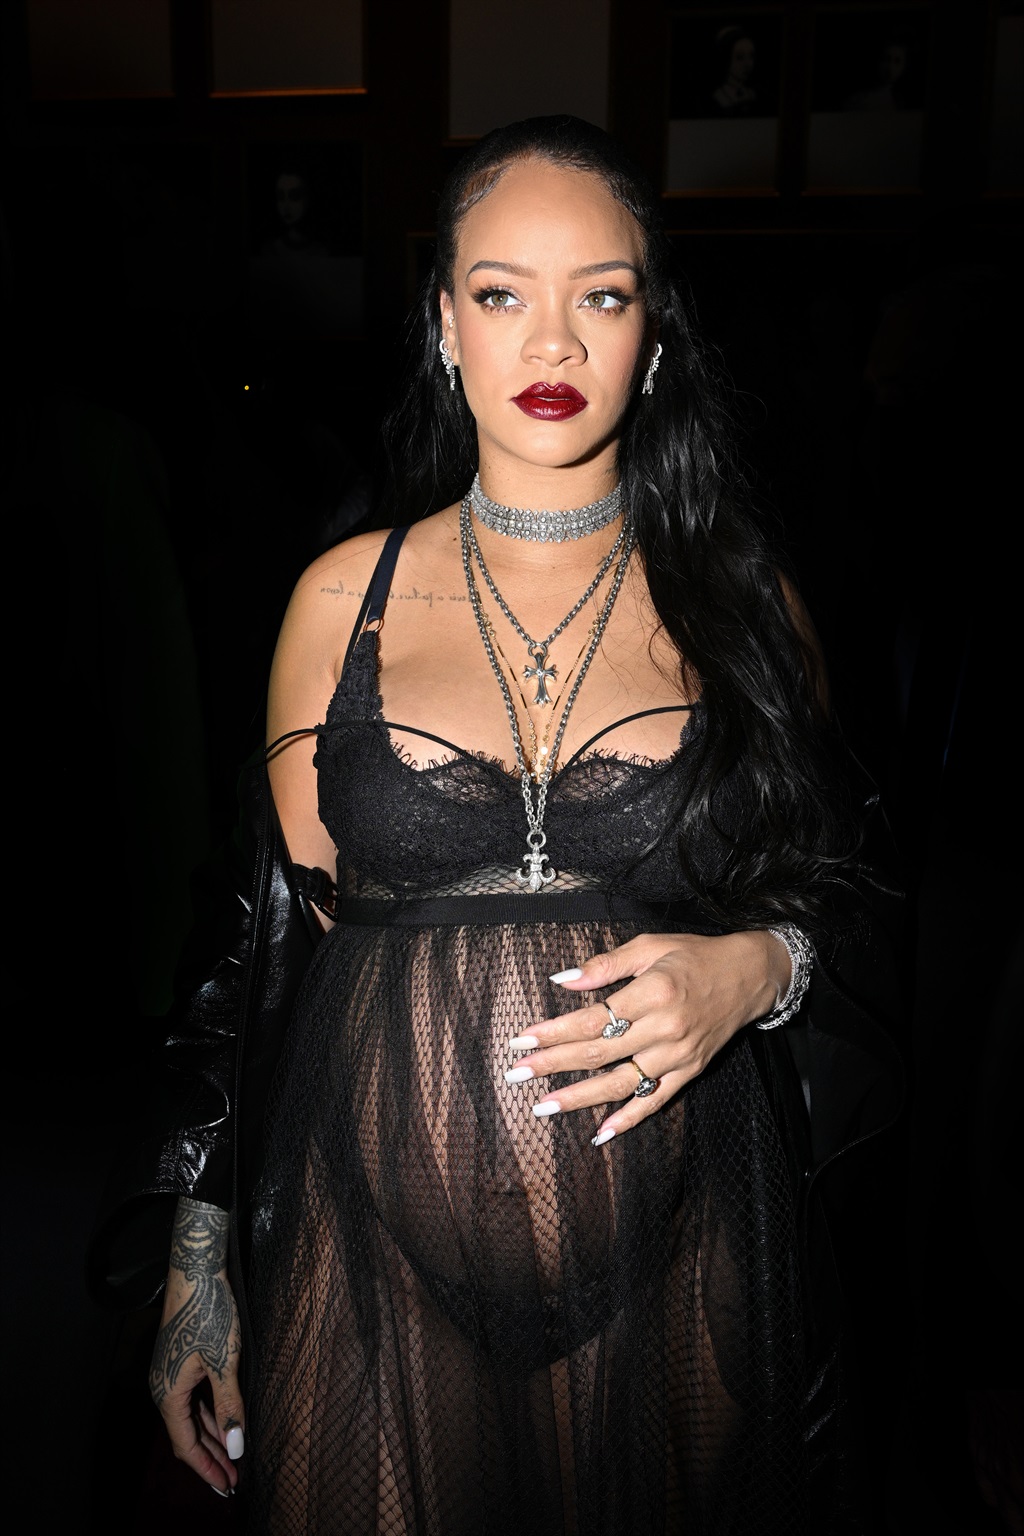 PARIS, FRANCE - MARCH 01: Rihanna attends the Dior